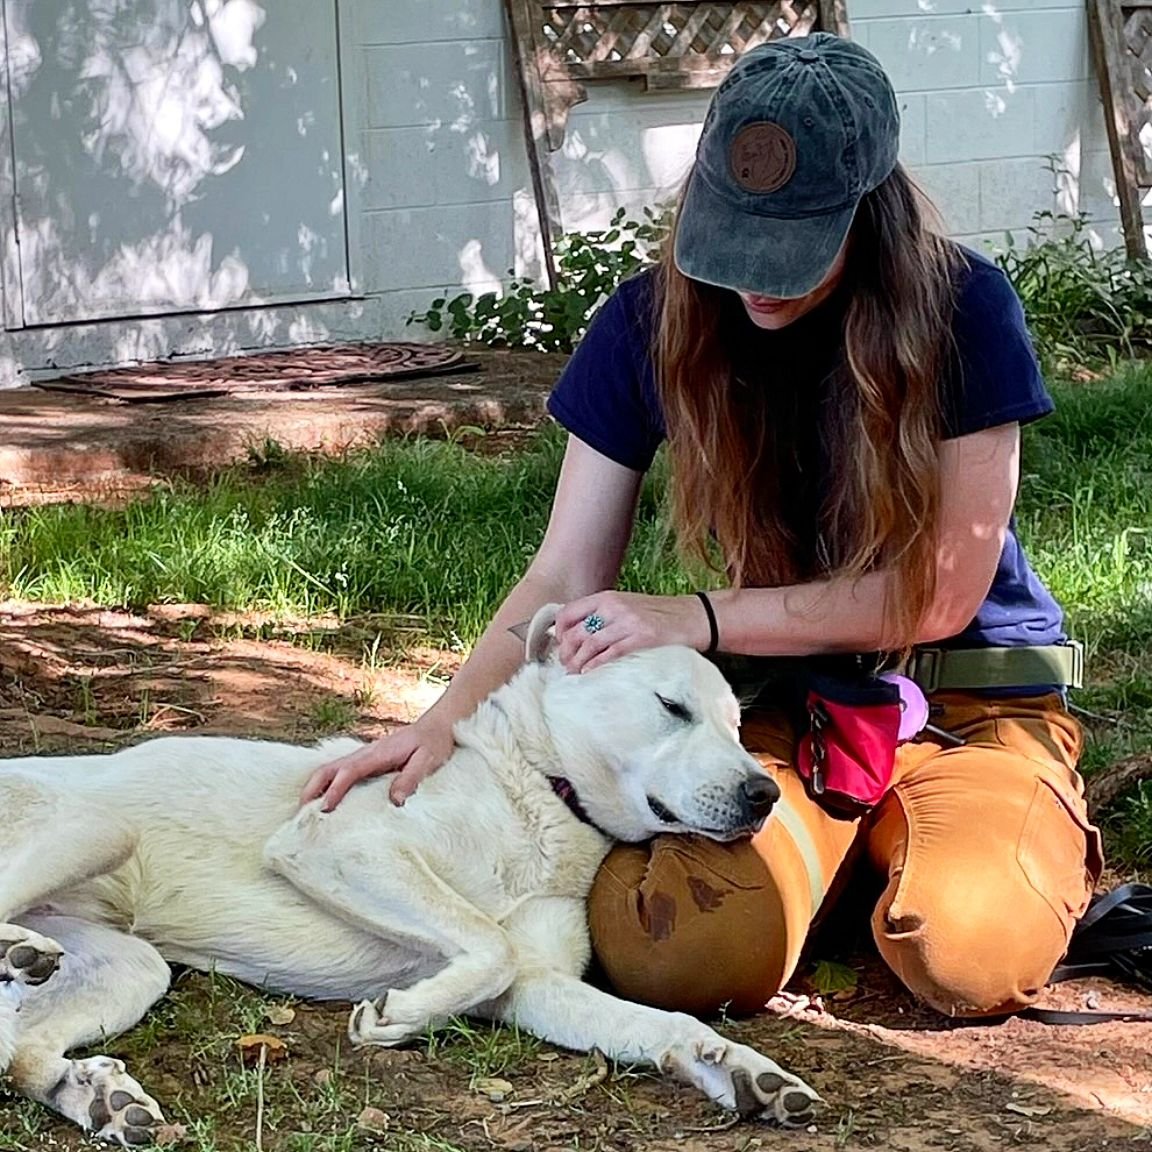 ✨️ It's such a blessing to be able to do what I do. ✨️
I love helping dogs become more balanced in their life...it helps me find balance in return. 

Lily here got some cuddles after our training session ended, and we had a nice moment where she put 